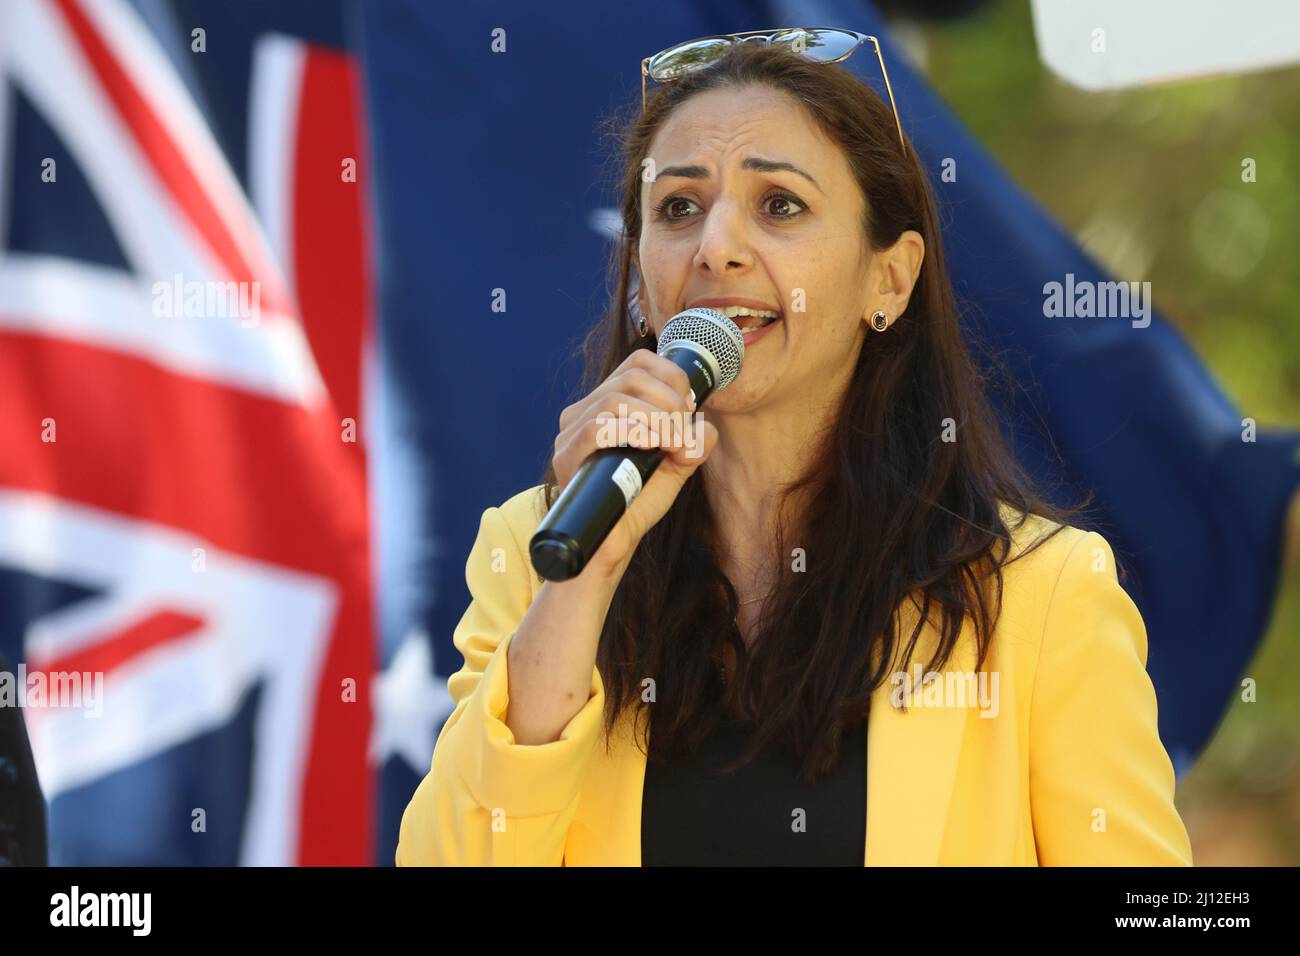 Sydney, Australia. 22nd March 2022. Protesters against vaccine mandates held a rally outside the NSW State Parliament building on Macquarie Street. Pictured: Vanessa Hadchiti, UAP (United Australia Party) candidate for the Sydney federal electorate. Credit: Richard Milnes/Alamy Live News Stock Photo